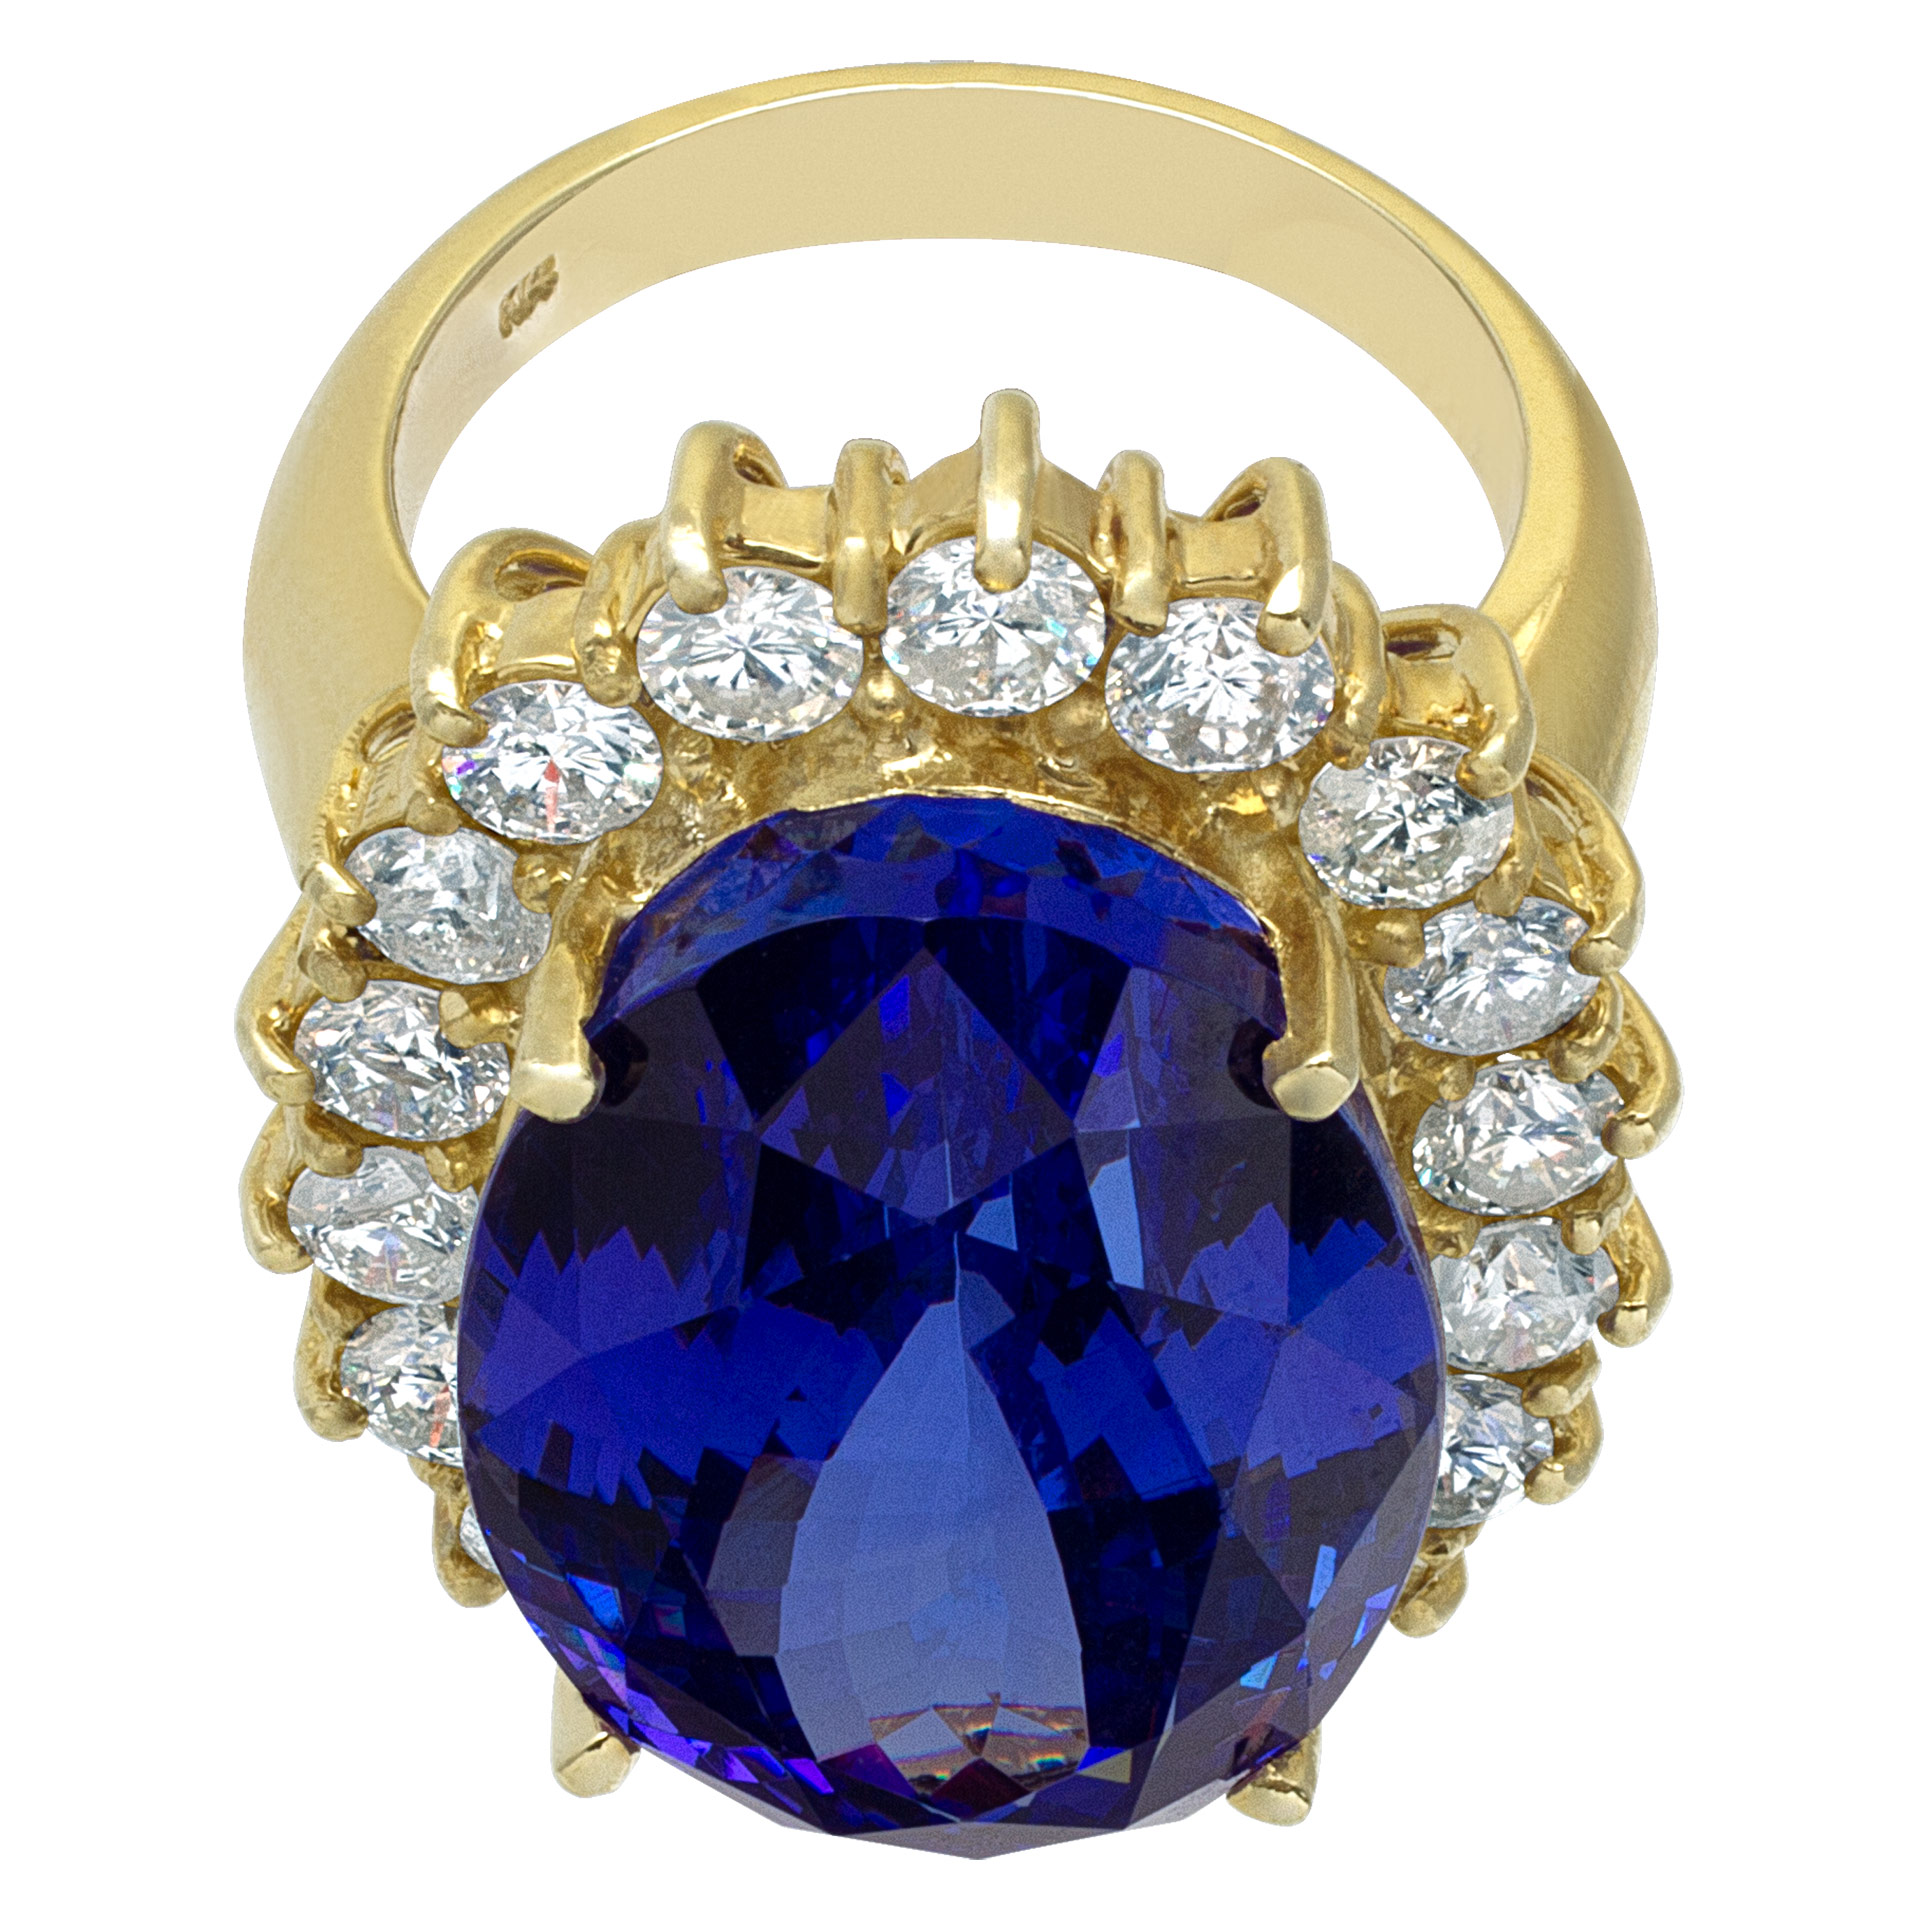 Tanzanite and diamond ring in 14k gold with approx. 25 carats tanzanite image 2